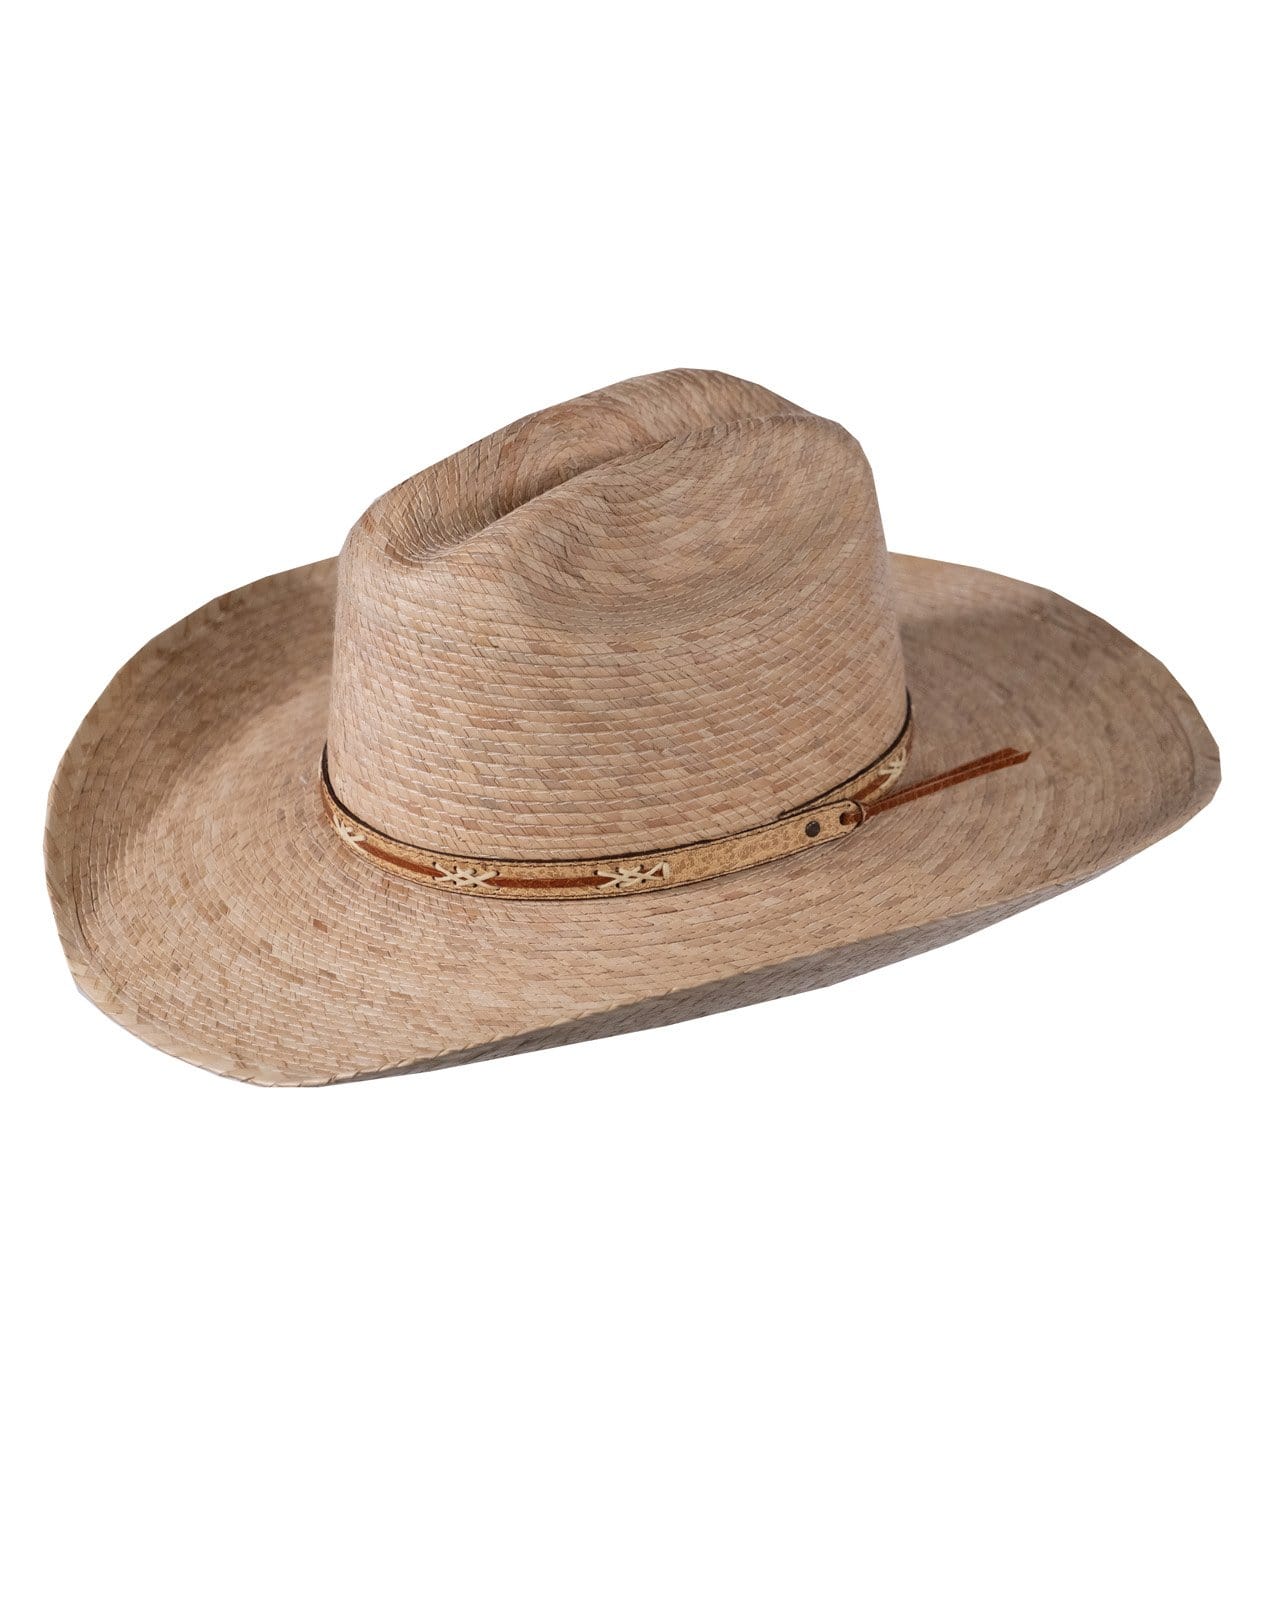 Outback Trading Company Lone Tree Natural / S 15185-NAT-SM 789043388015 Hats